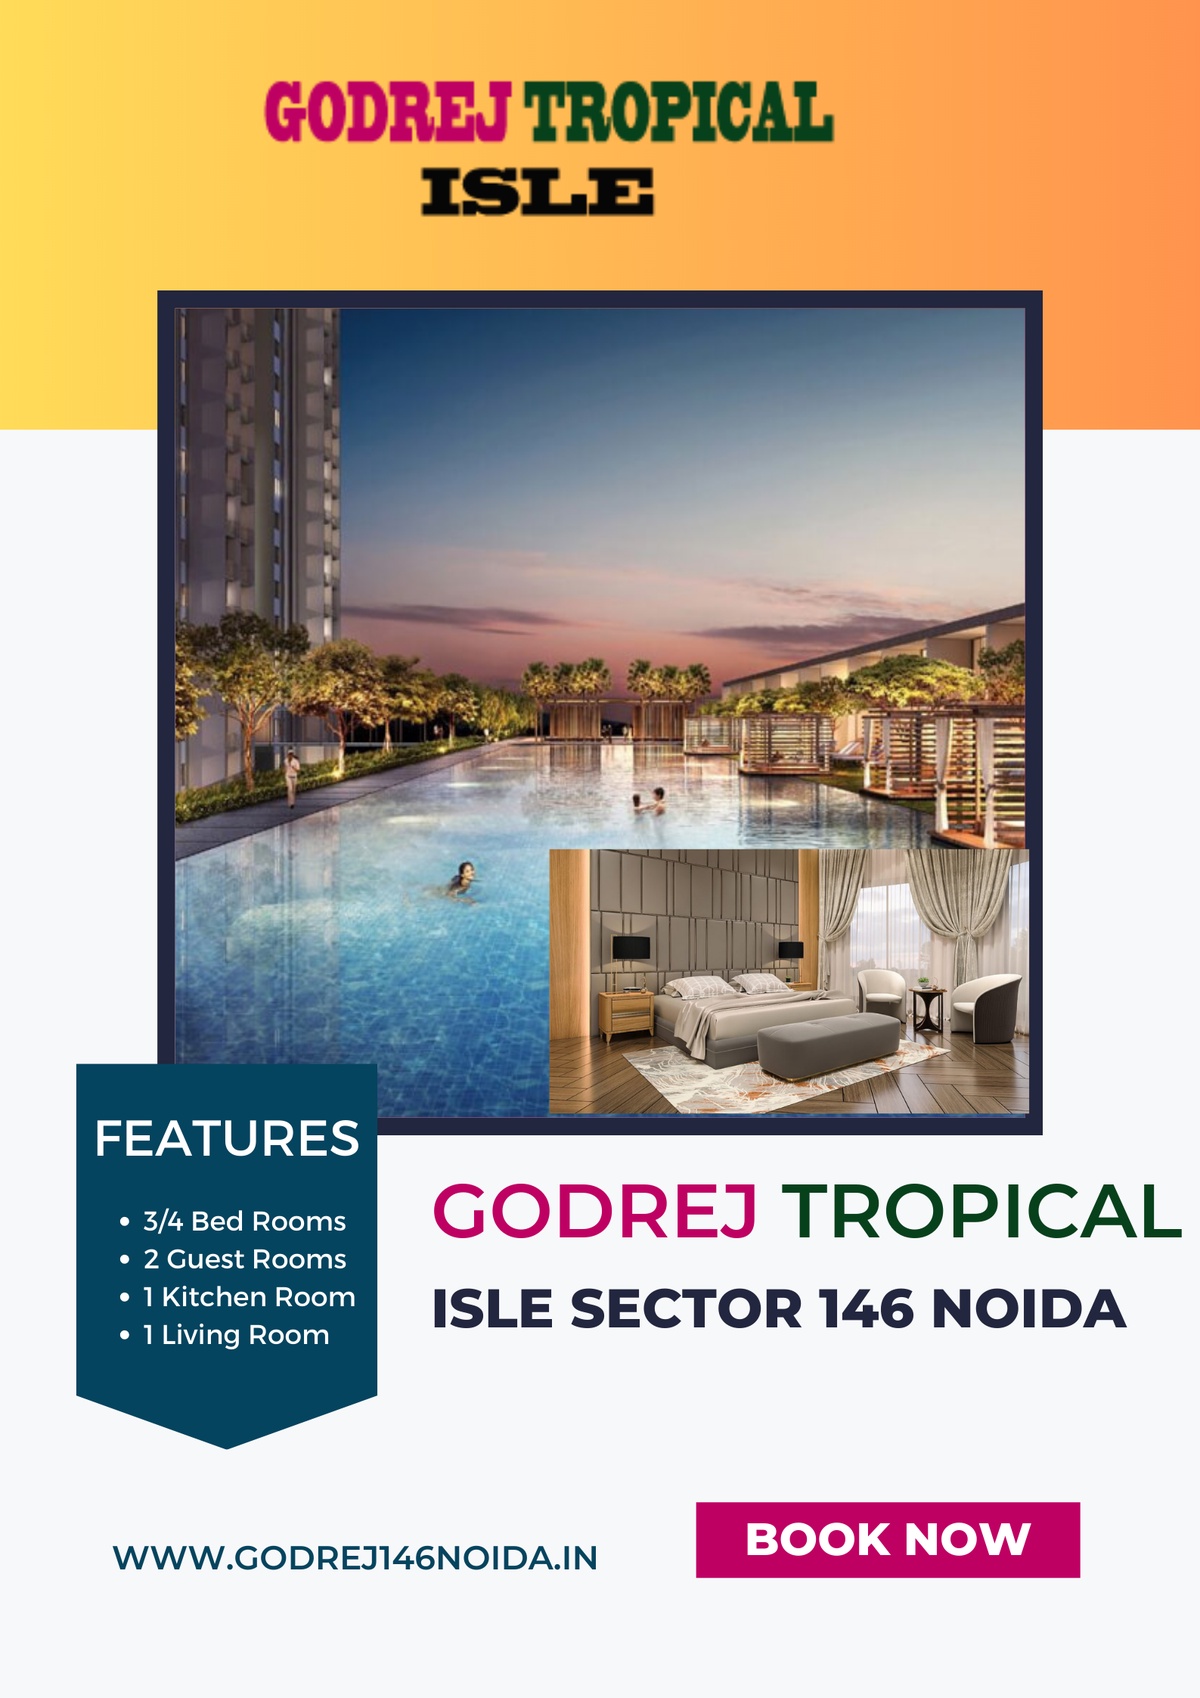 Realize the Benefits of Investing in Godrej Tropical Isle